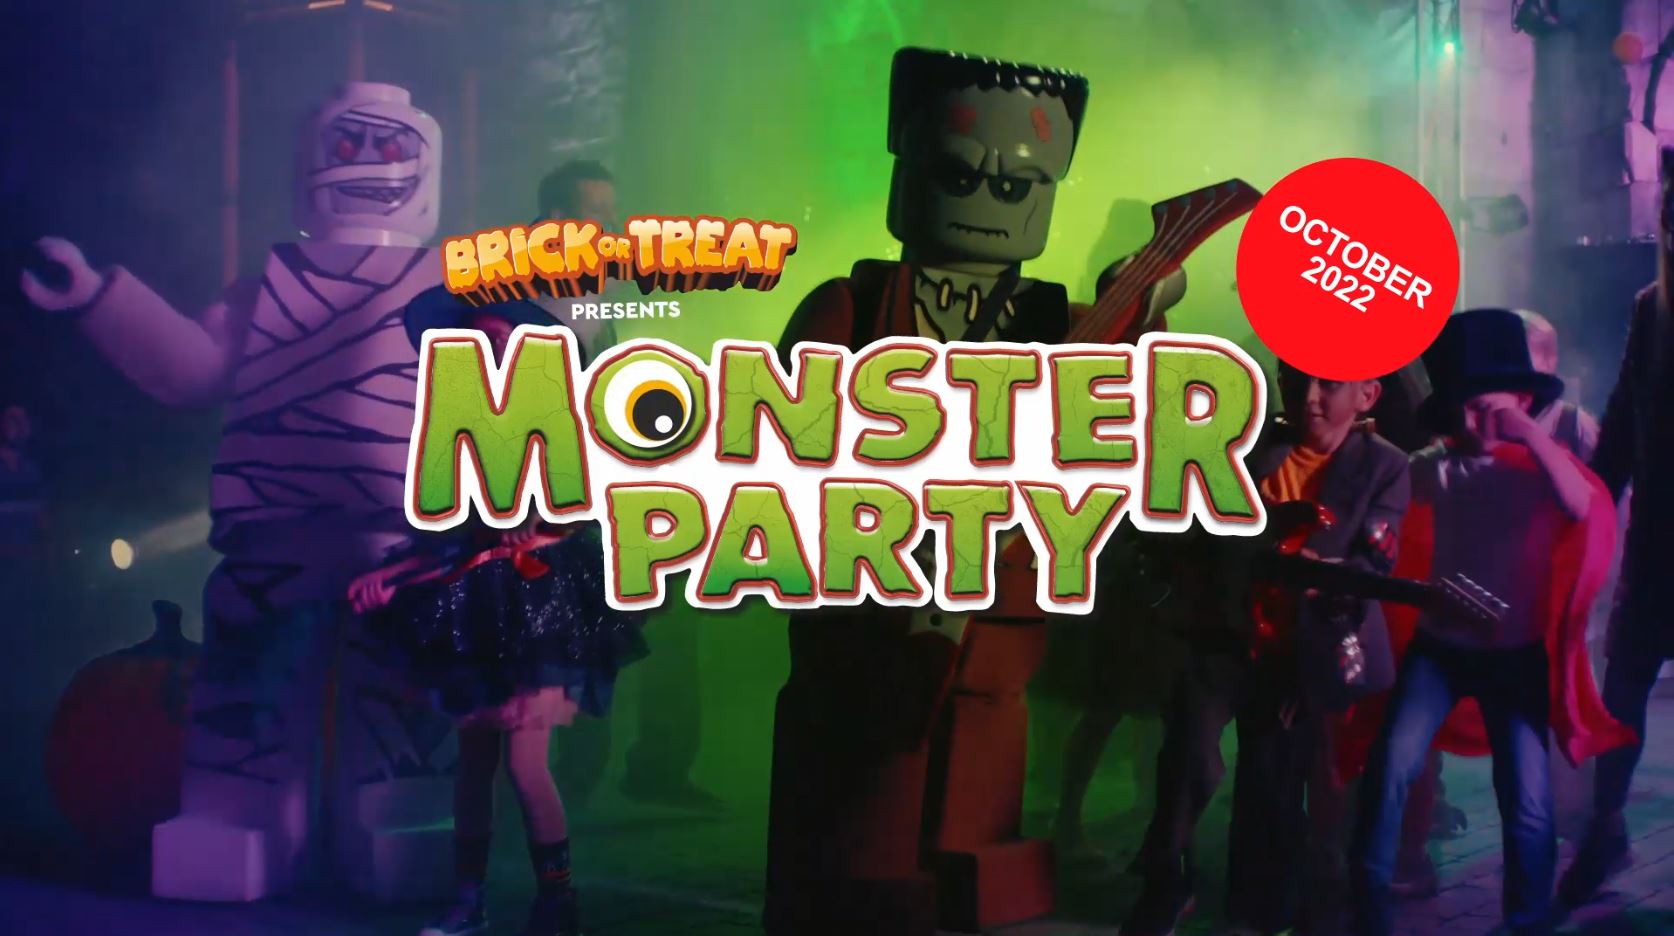 Brick-or-Treat presents: The Monster Party